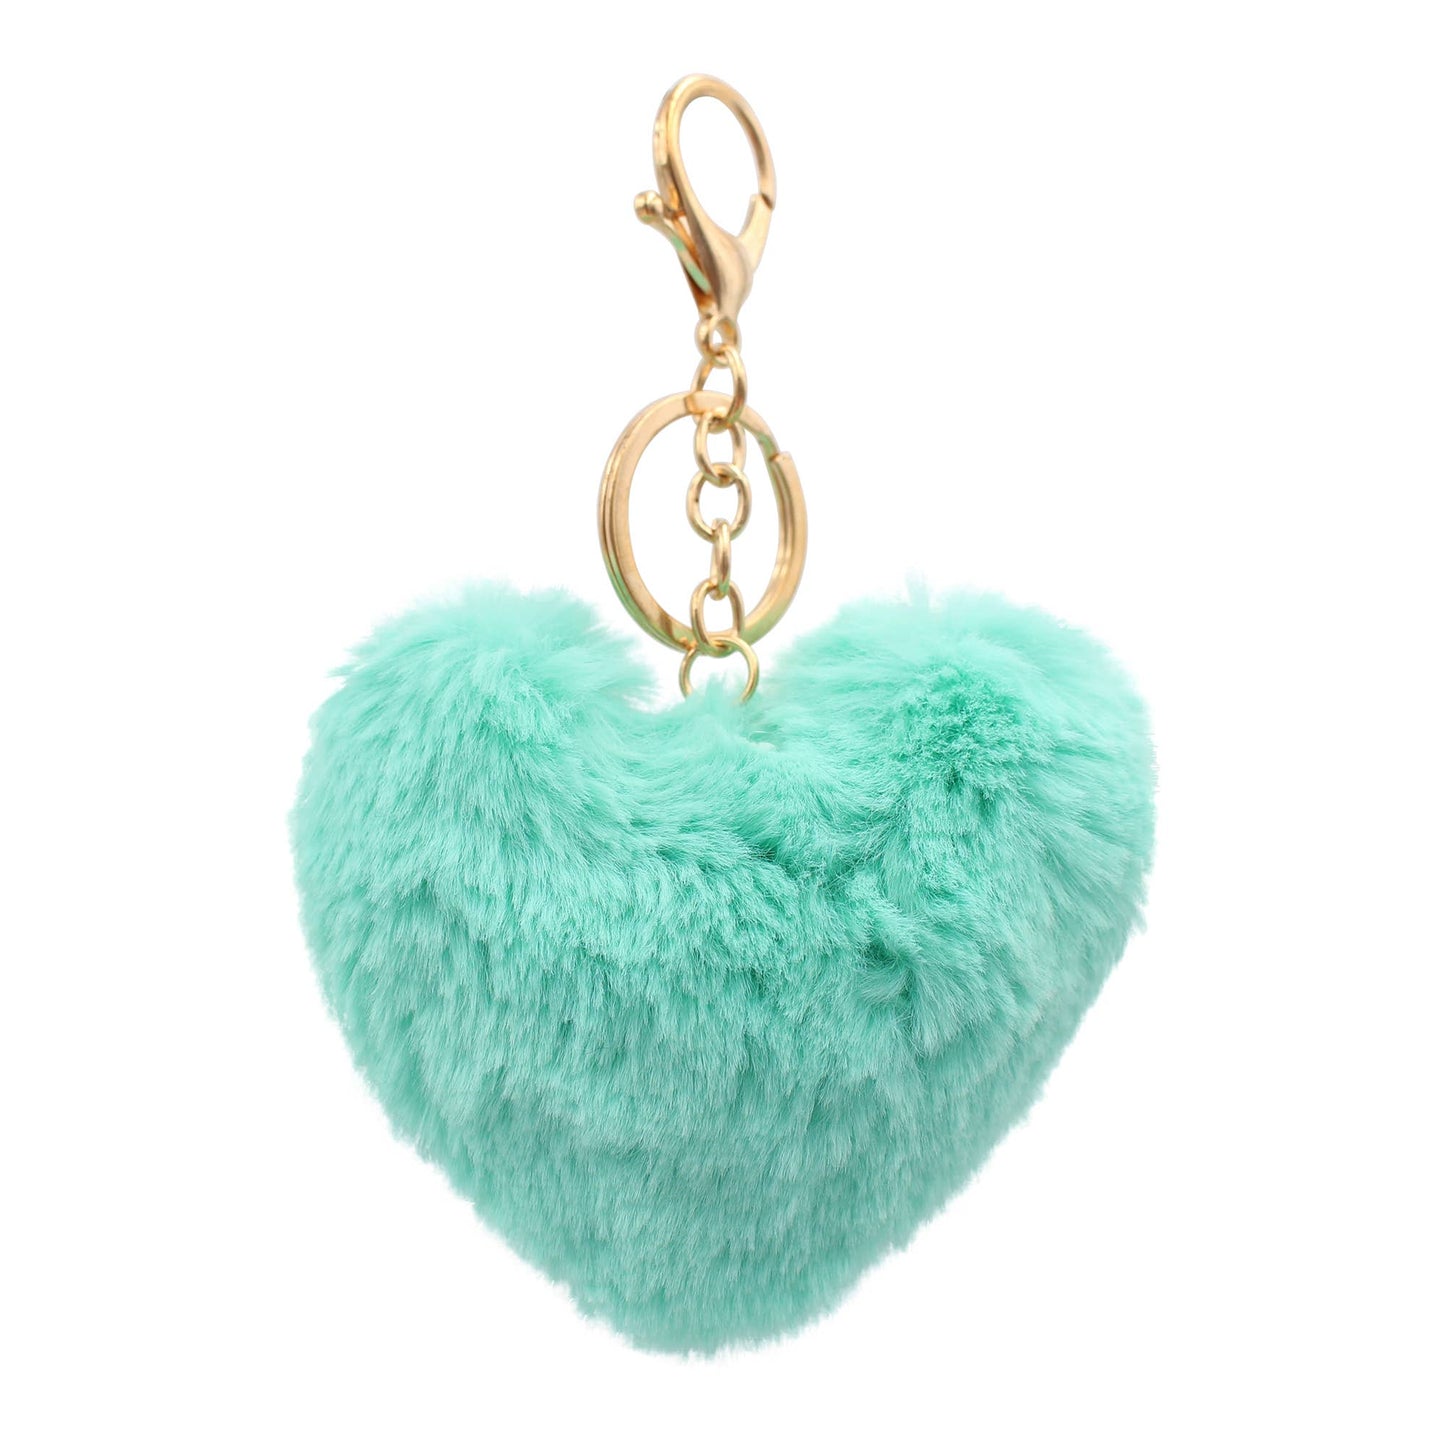 Image of Real Sic Teal Pom Pom Fuzzy  Heart Key Chain for girl's bag and purse